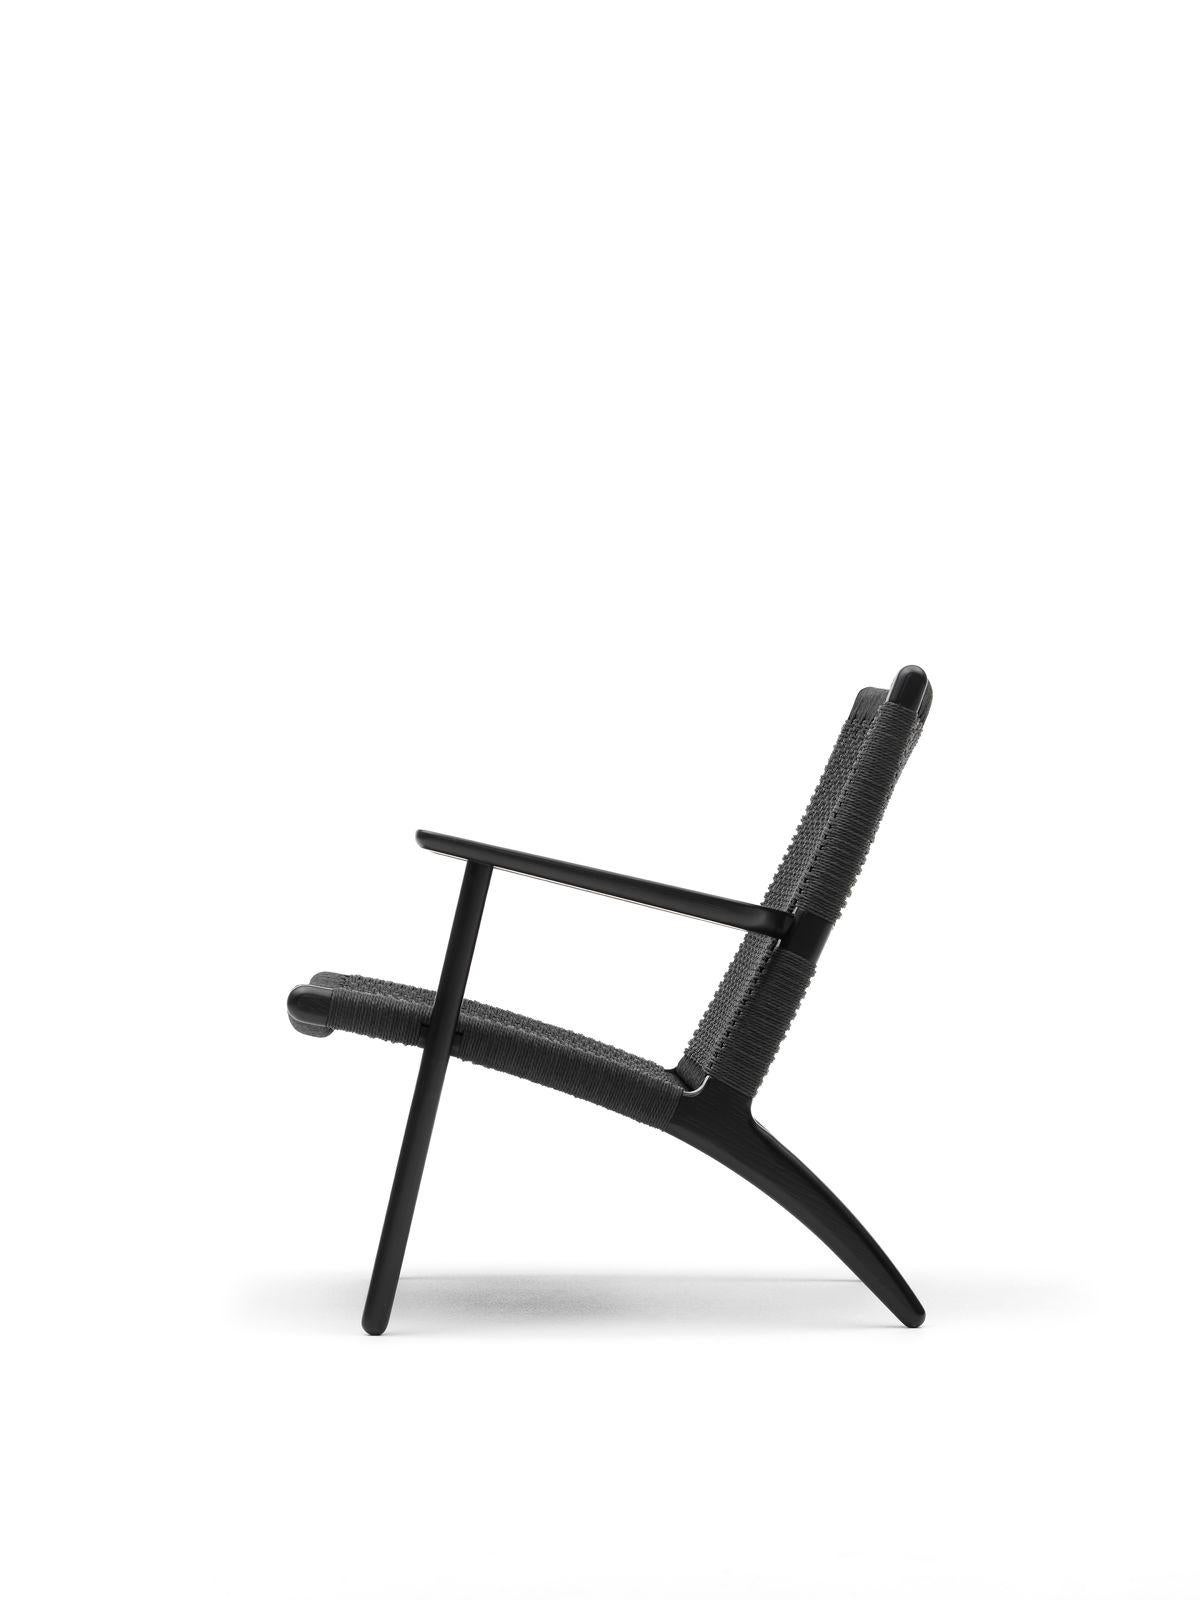 The CH25 is one of the first four chairs Hans J. Wegner created exclusively for Carl Hansen & Søn at the beginning of the collaboration which started in 1949. The chair, considered revolutionary at the time, was put into production in 1950.